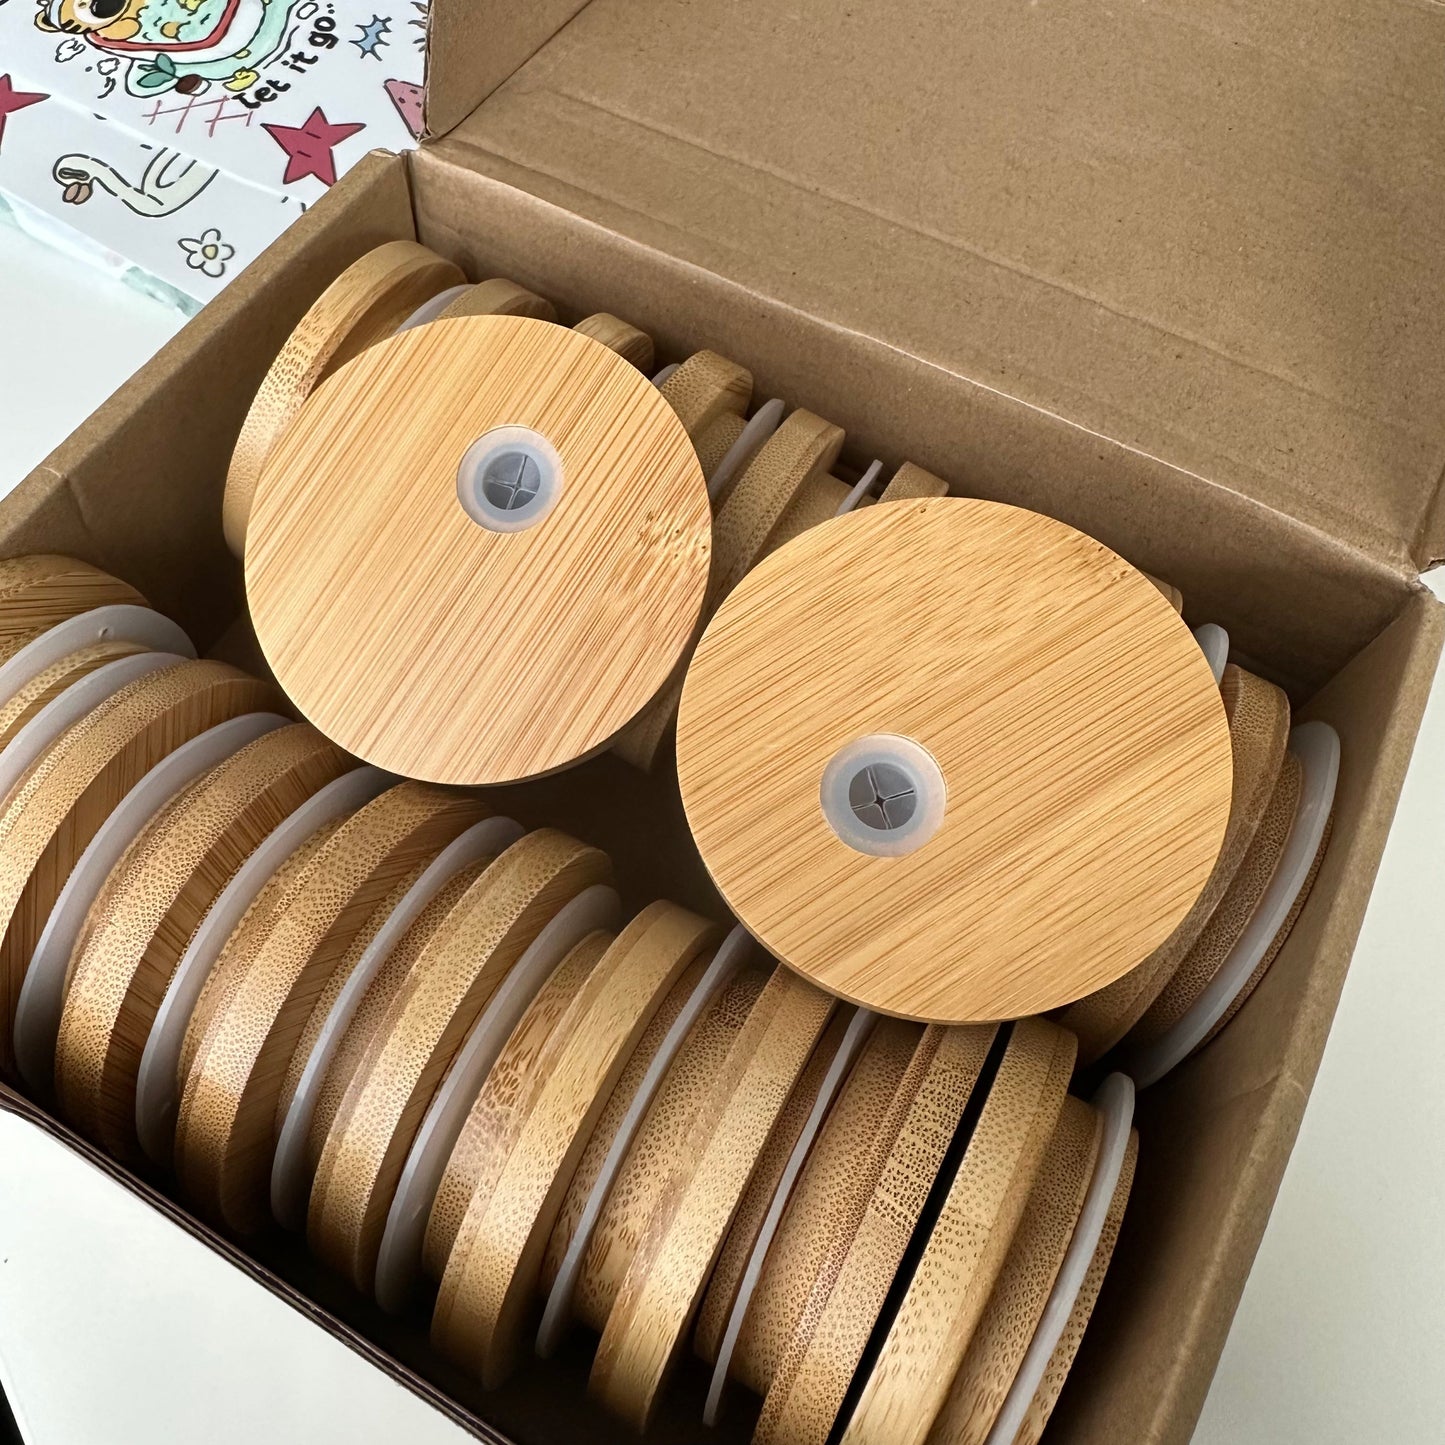 Reusuable Bamboo Lids